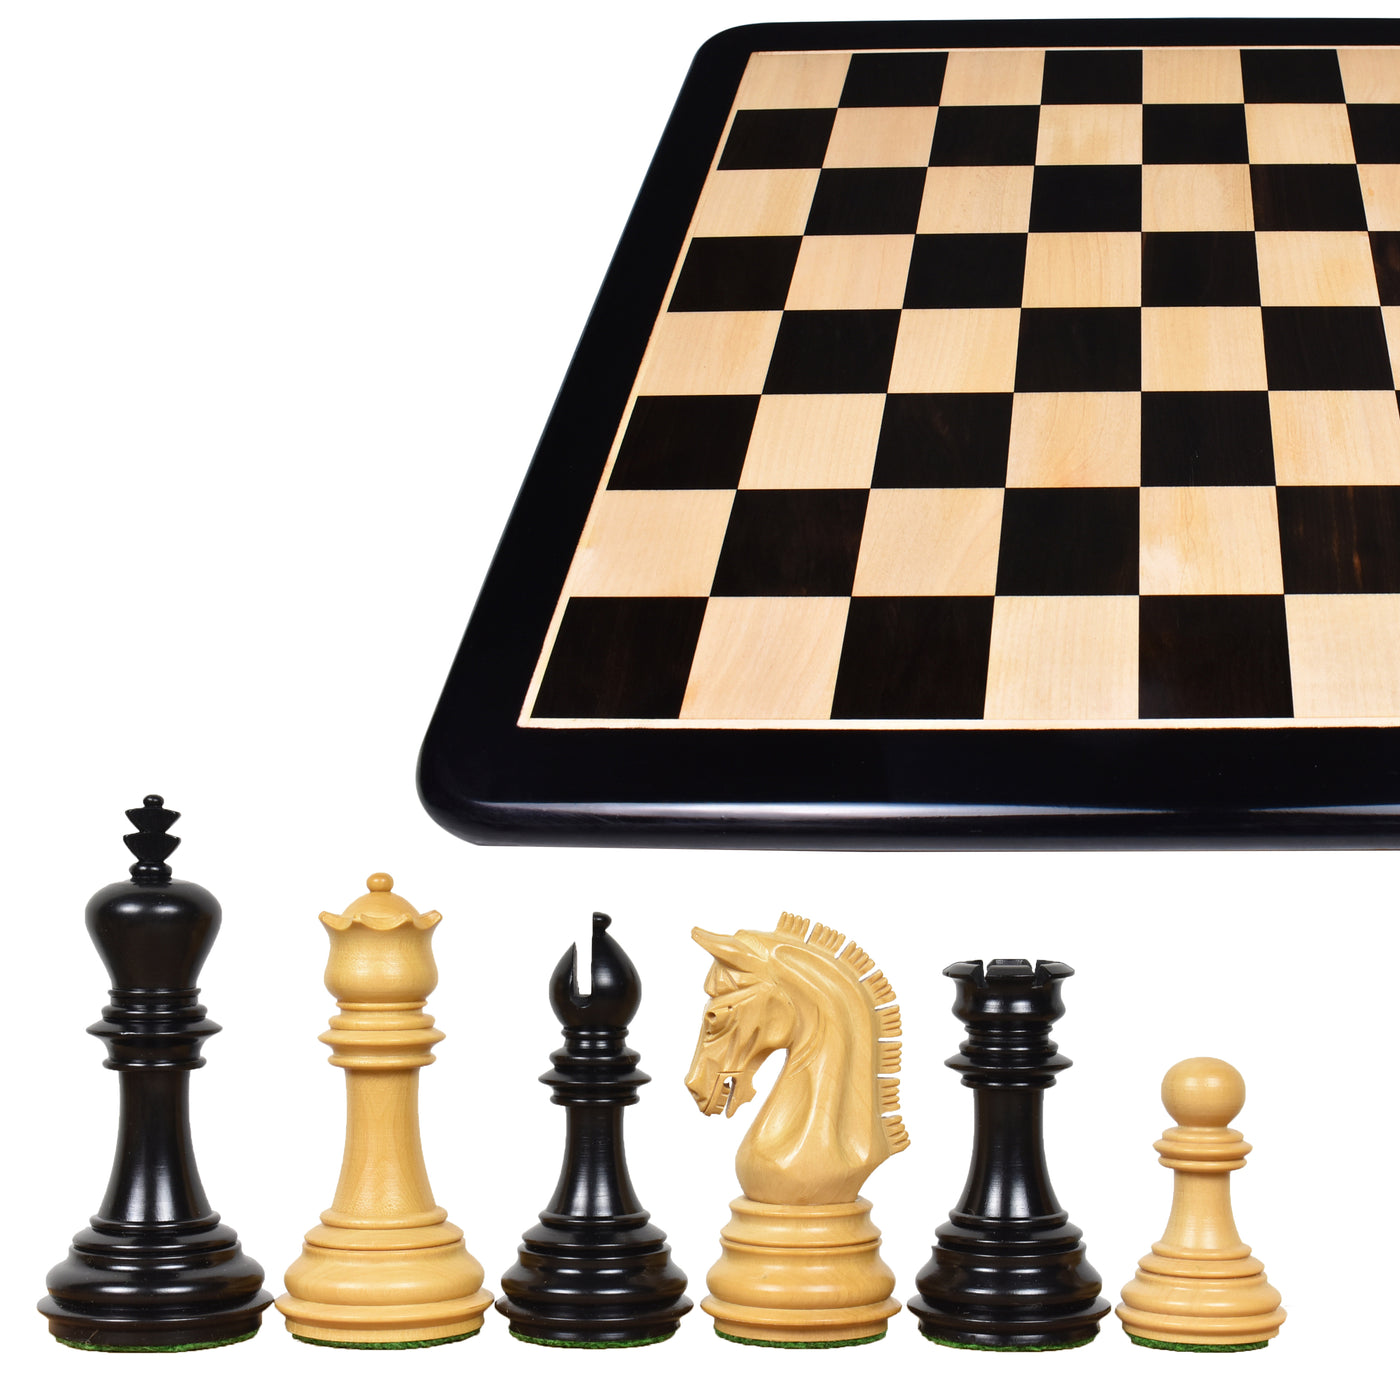 3.8" Imperial Staunton Luxury Ebony Wood Chess Pieces with 21" Large Solid Inlaid Ebony & Maple Wood Chess board